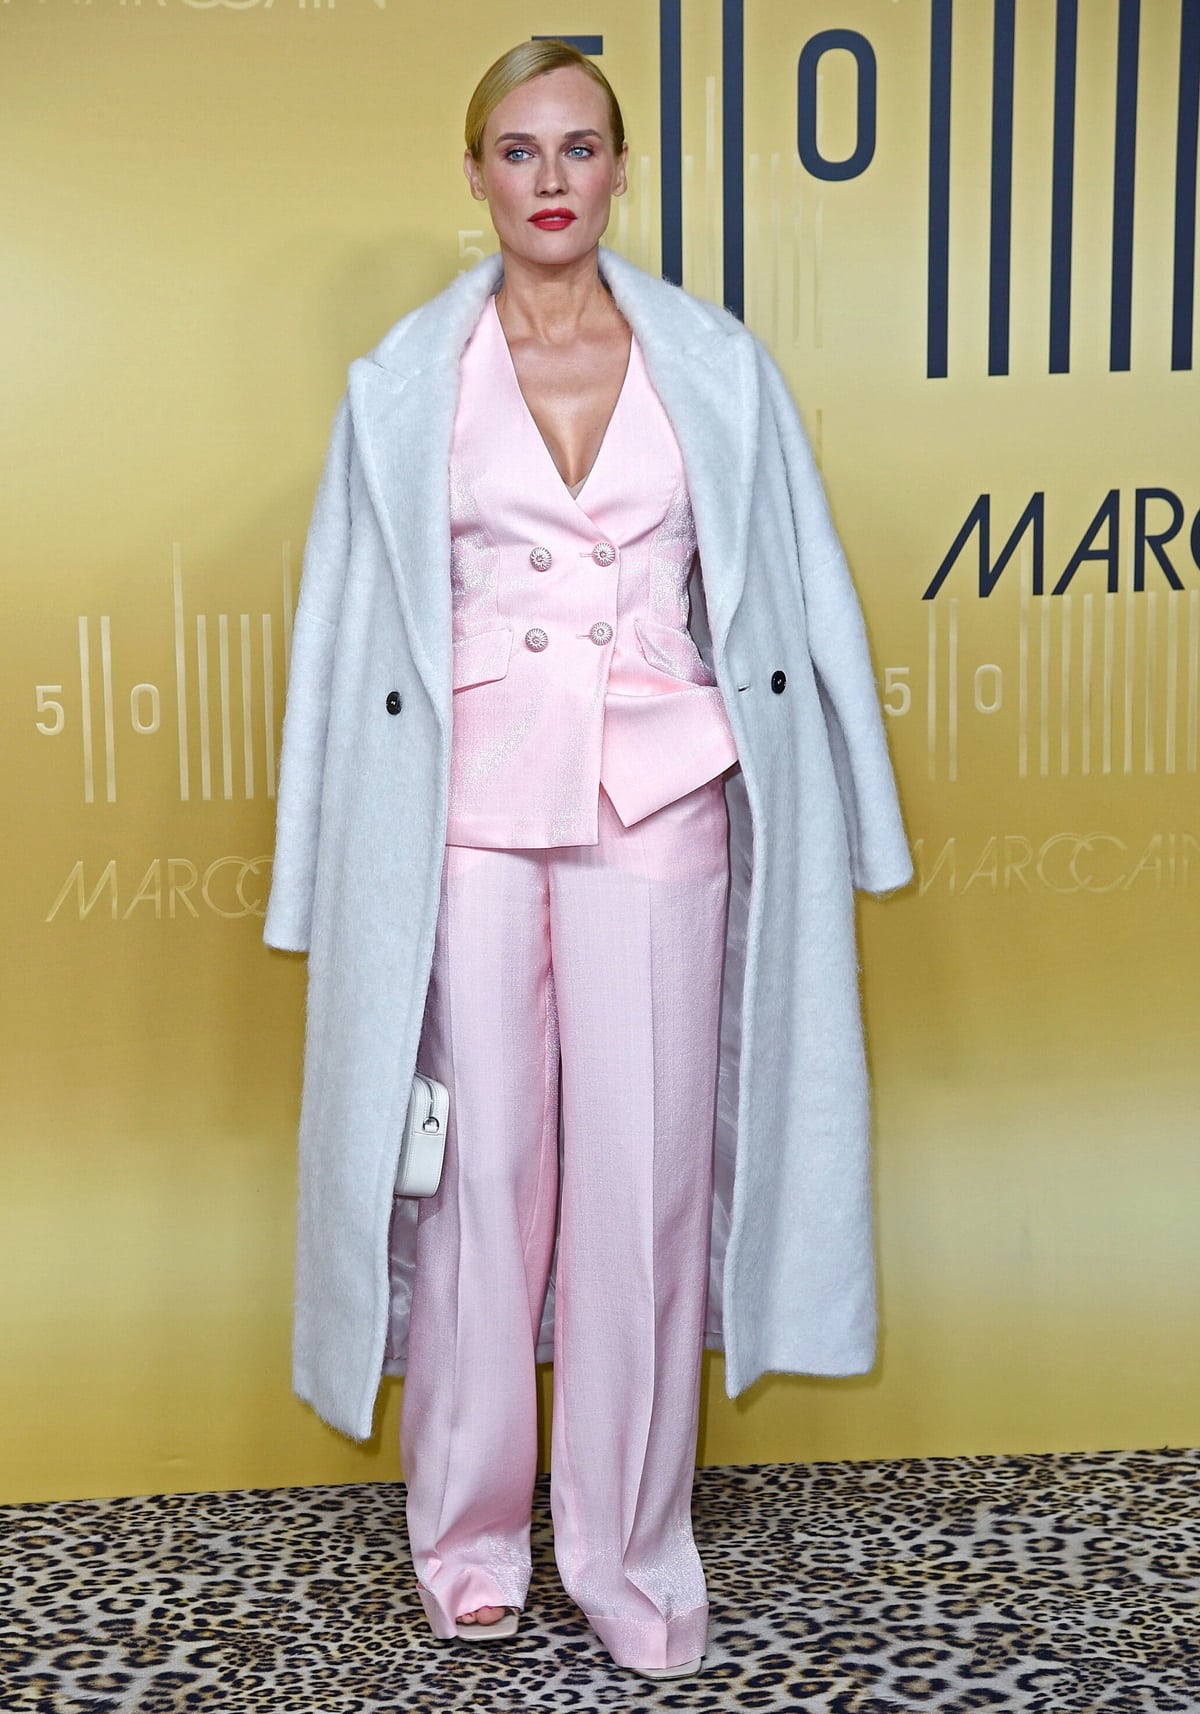 Diane Kruger looking elegant in a pink waistcoat and matching flared pants during the Marc Cain 50th anniversary fashion show event